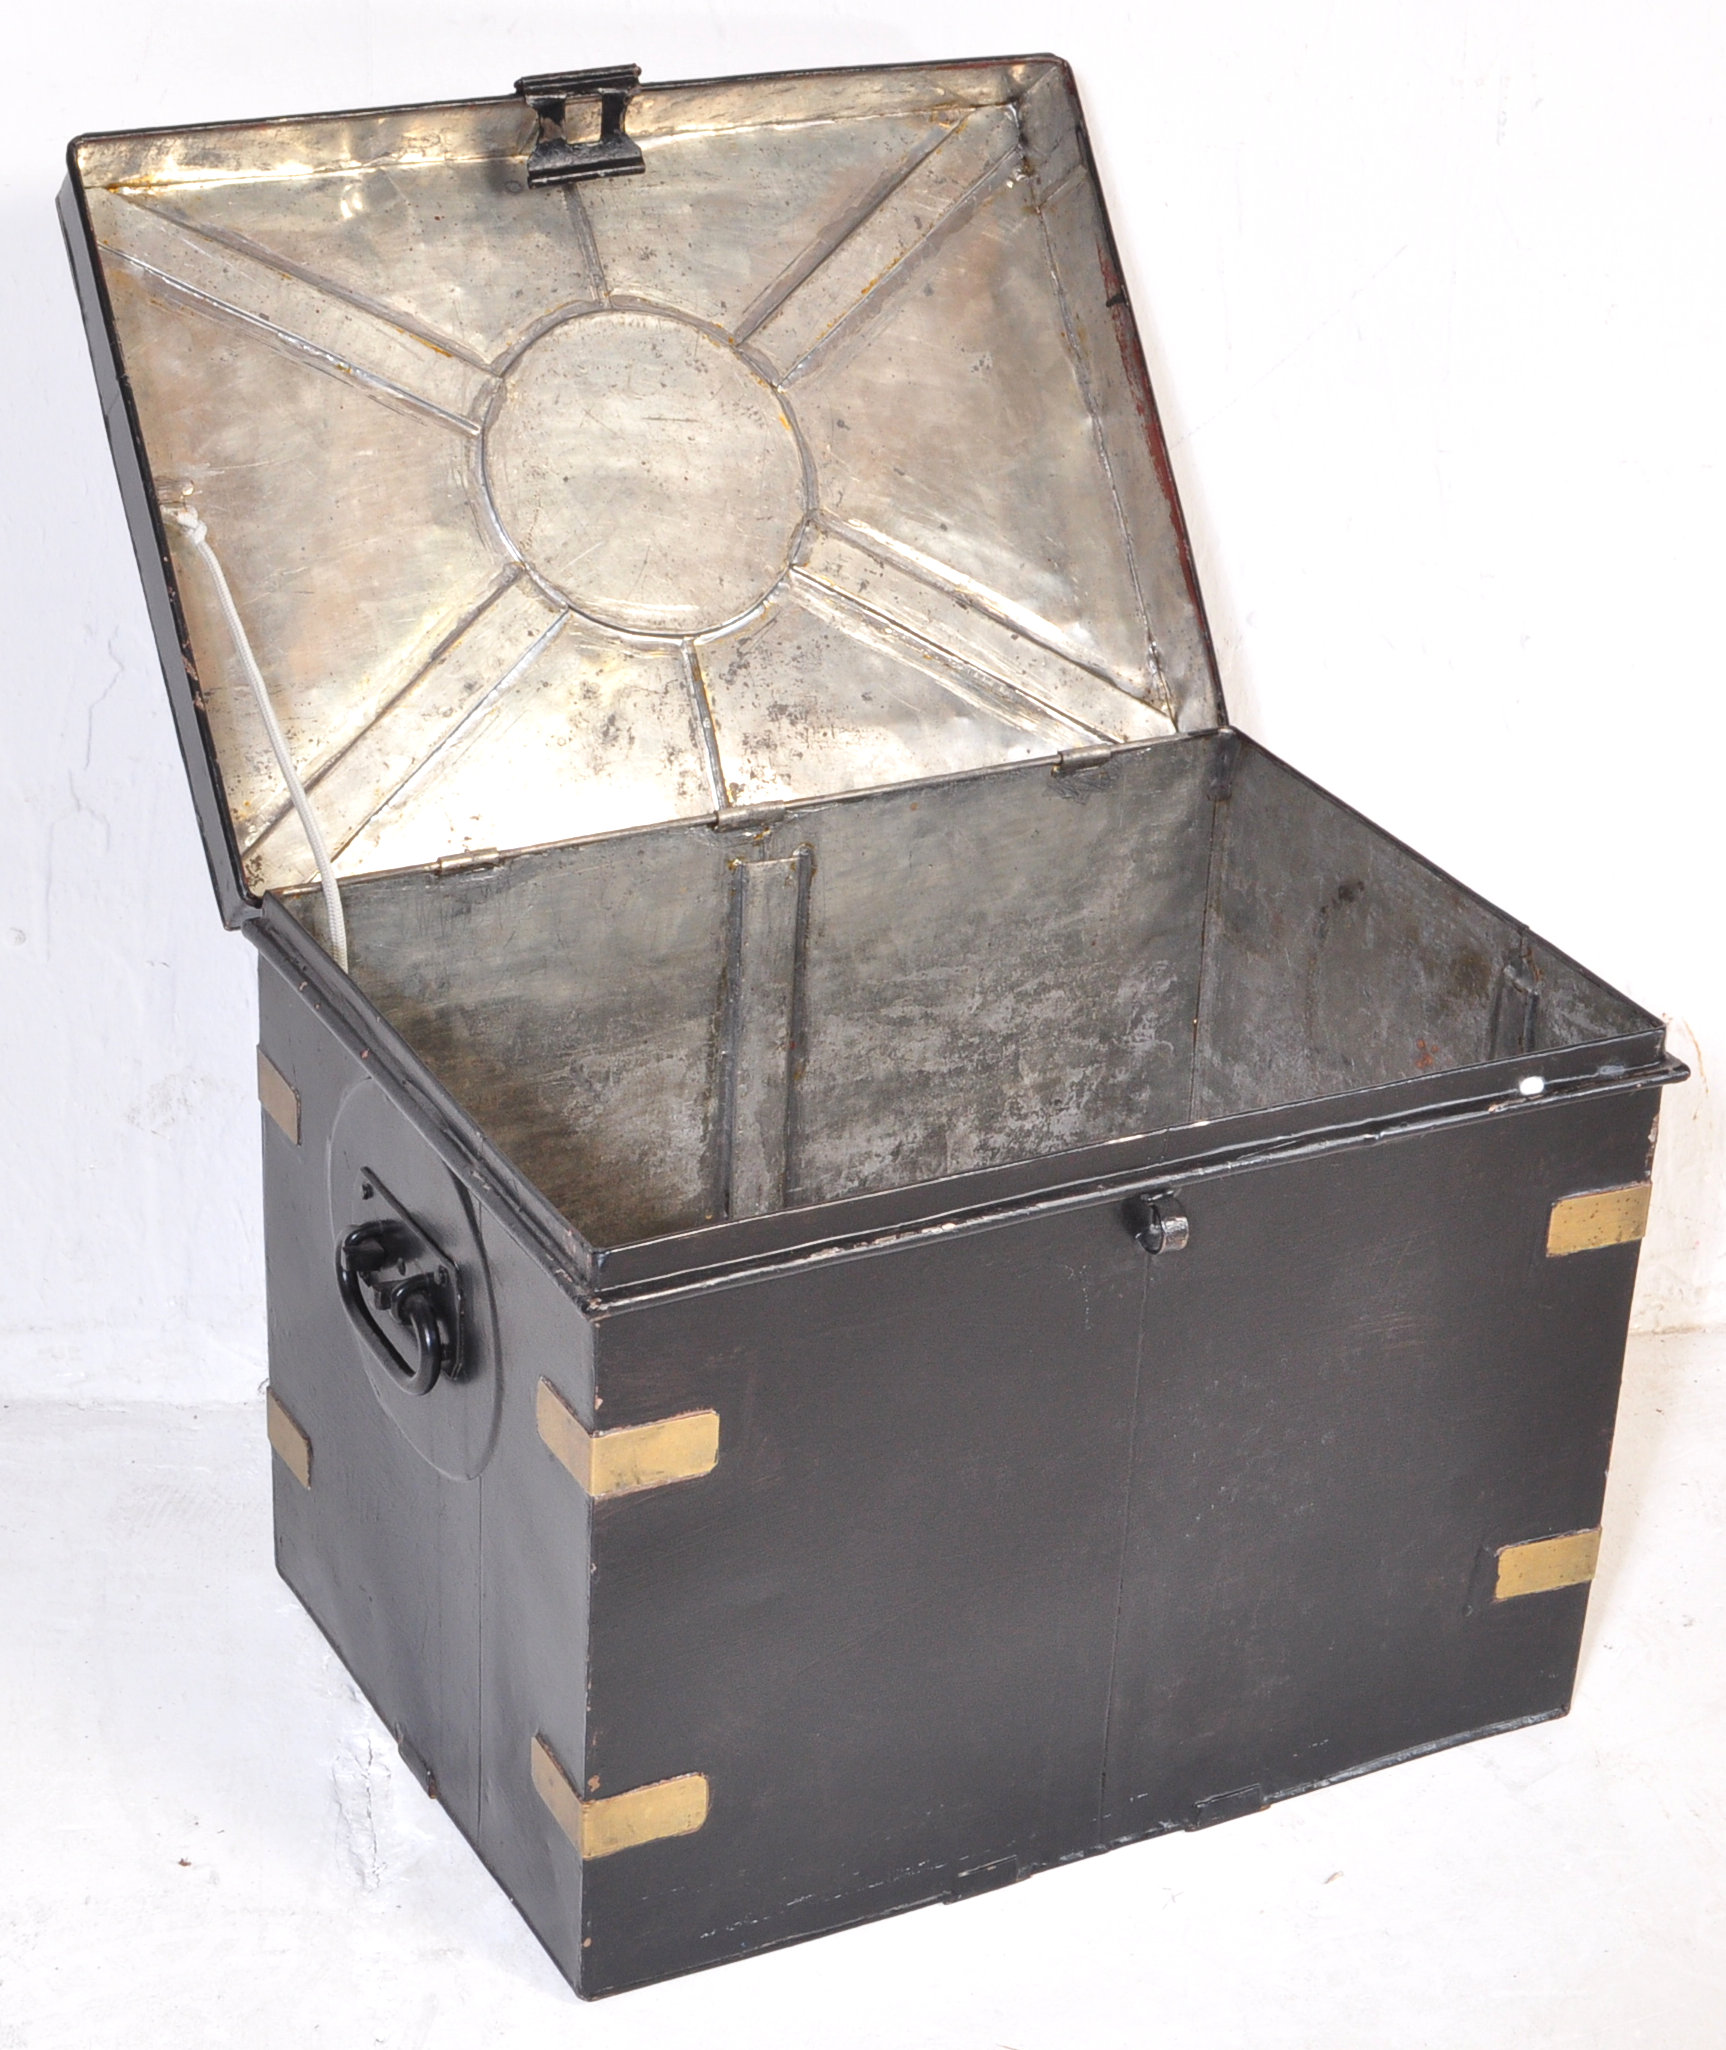 EARLY 20TH CENTURY BLACK METAL & BRASS DEEDS BOX - Image 4 of 5